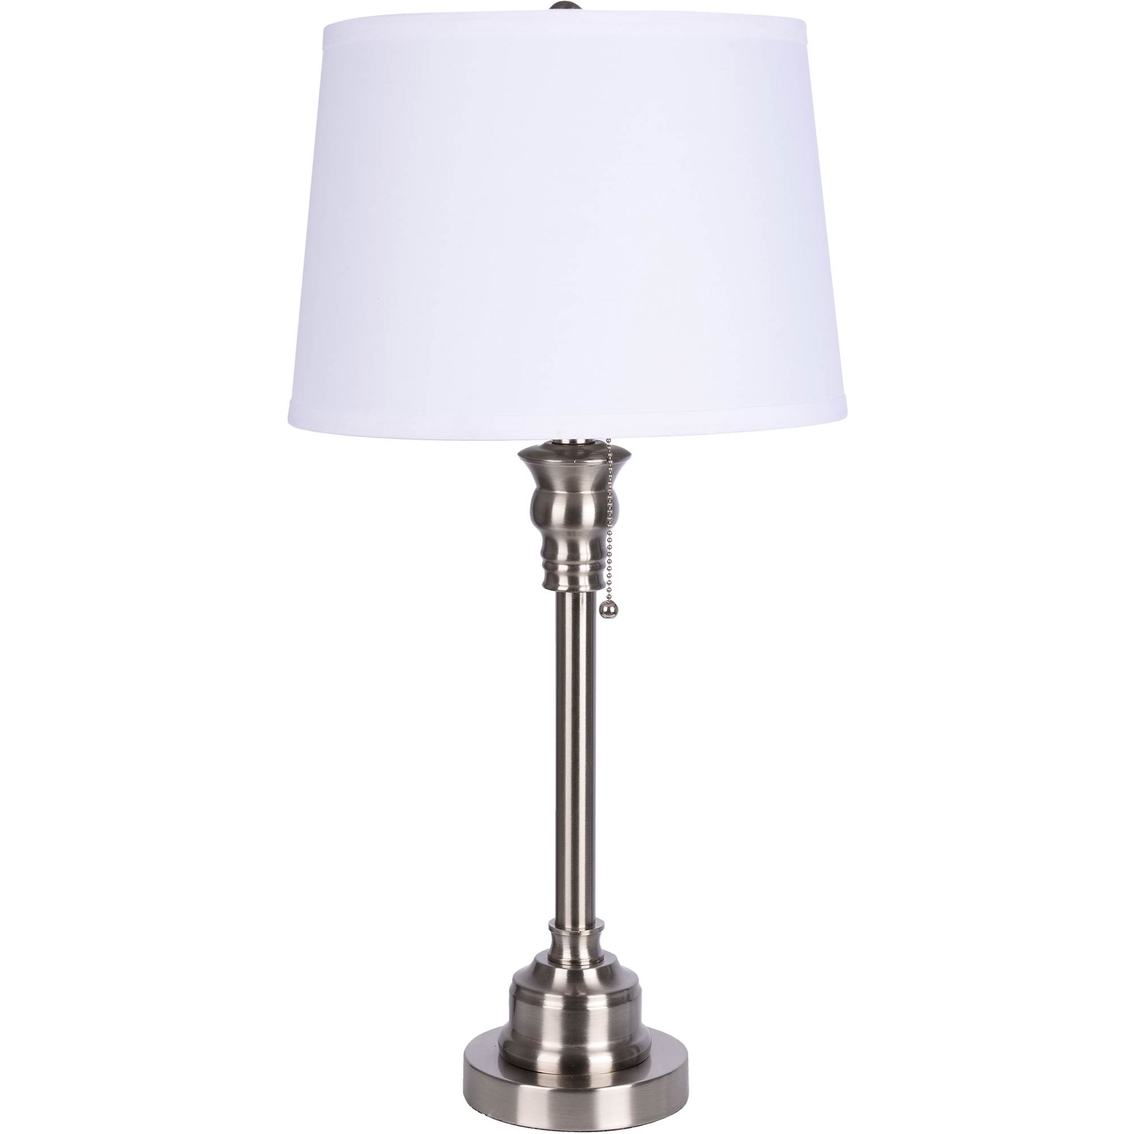 Simply Perfect Bolton Brushed Nickel Table Lamp | Lamps | Home